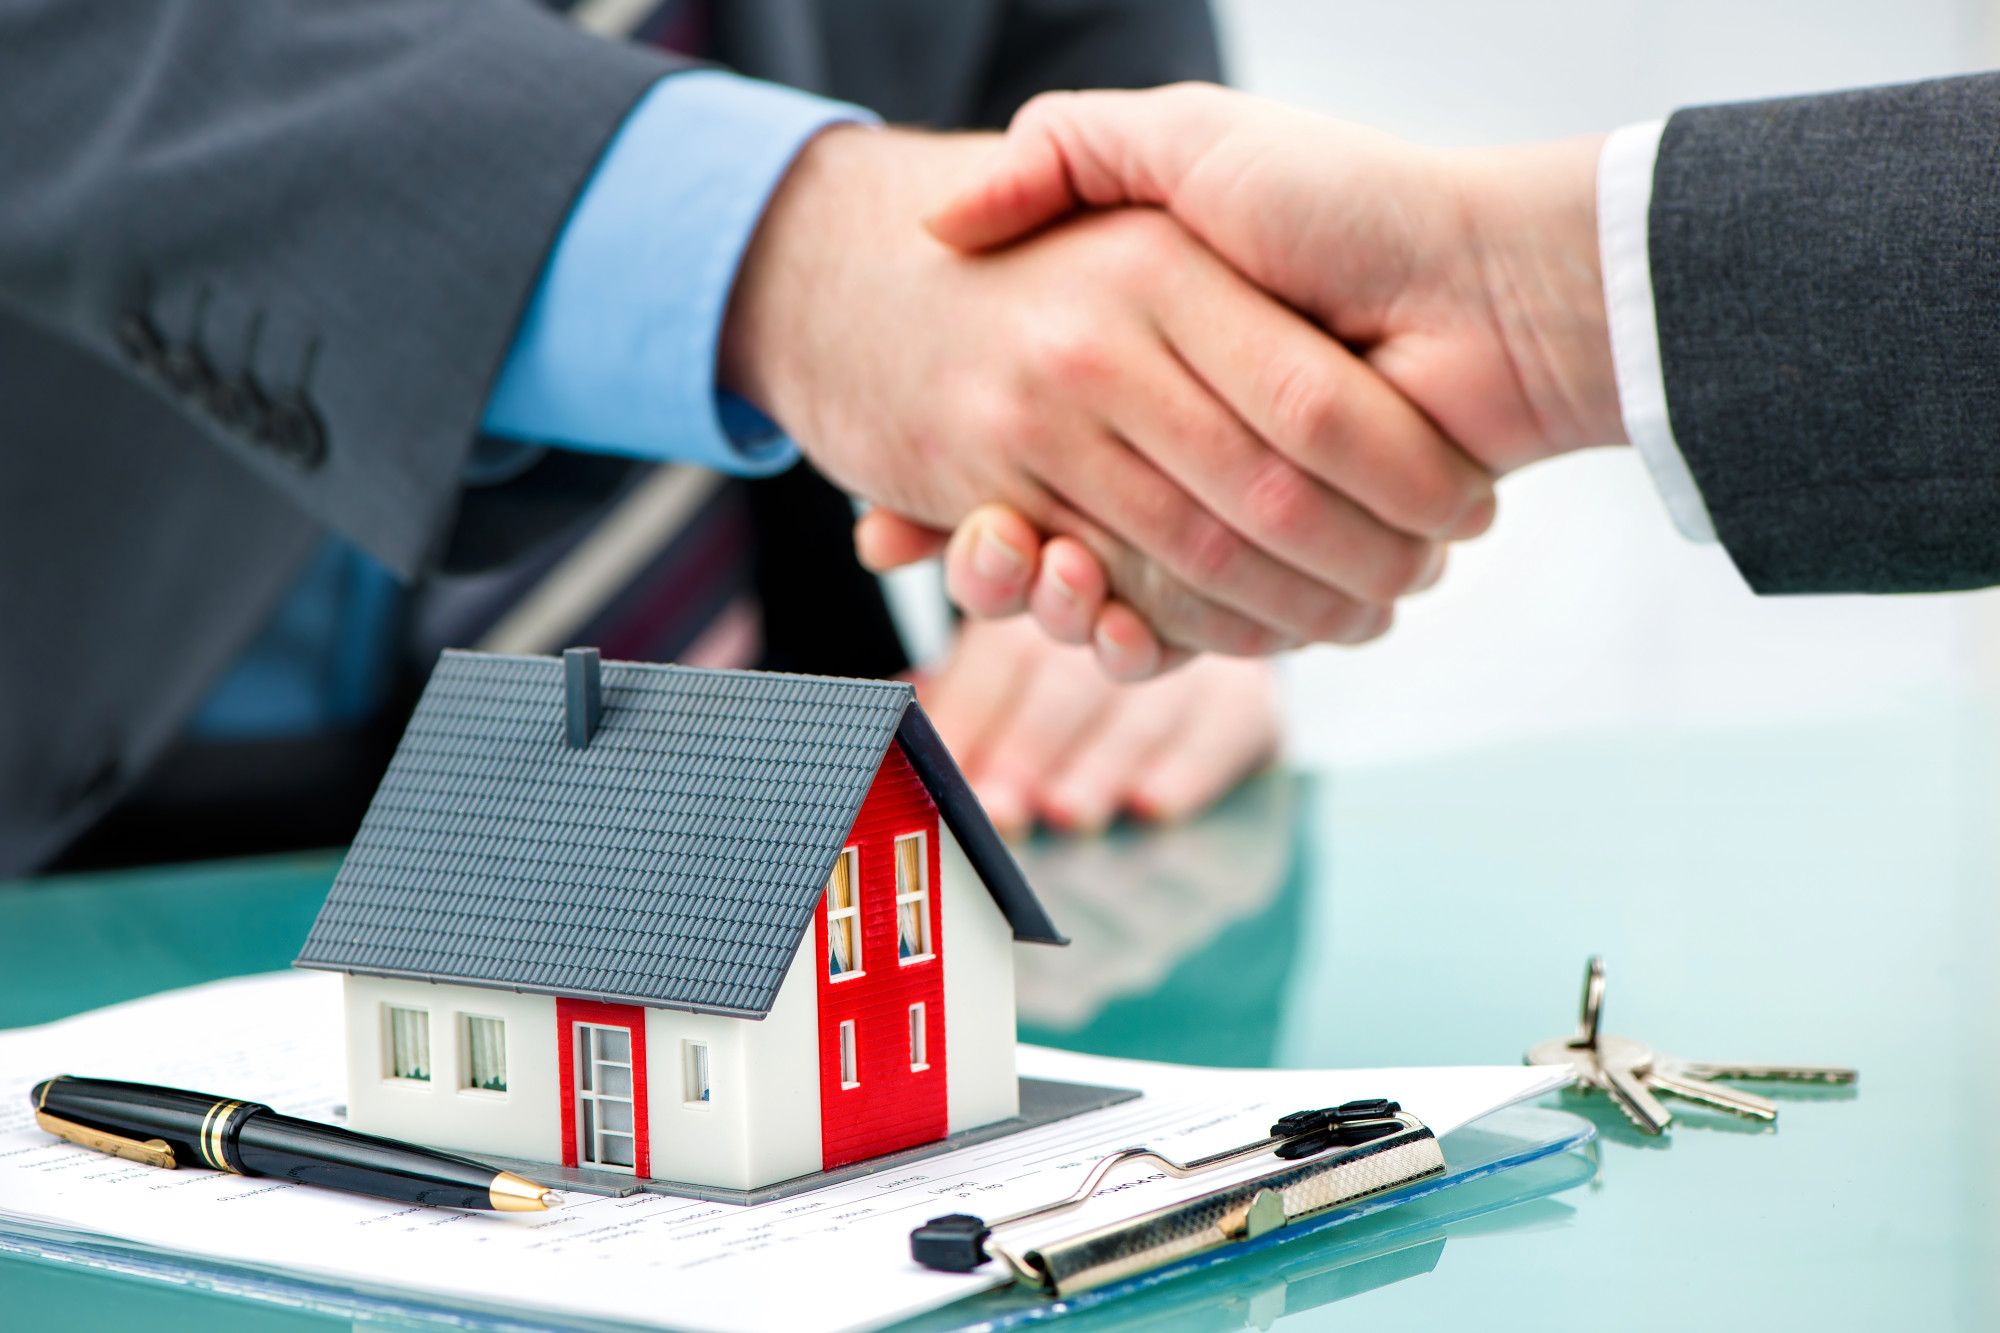 7 Tips to Start Rental Property Business